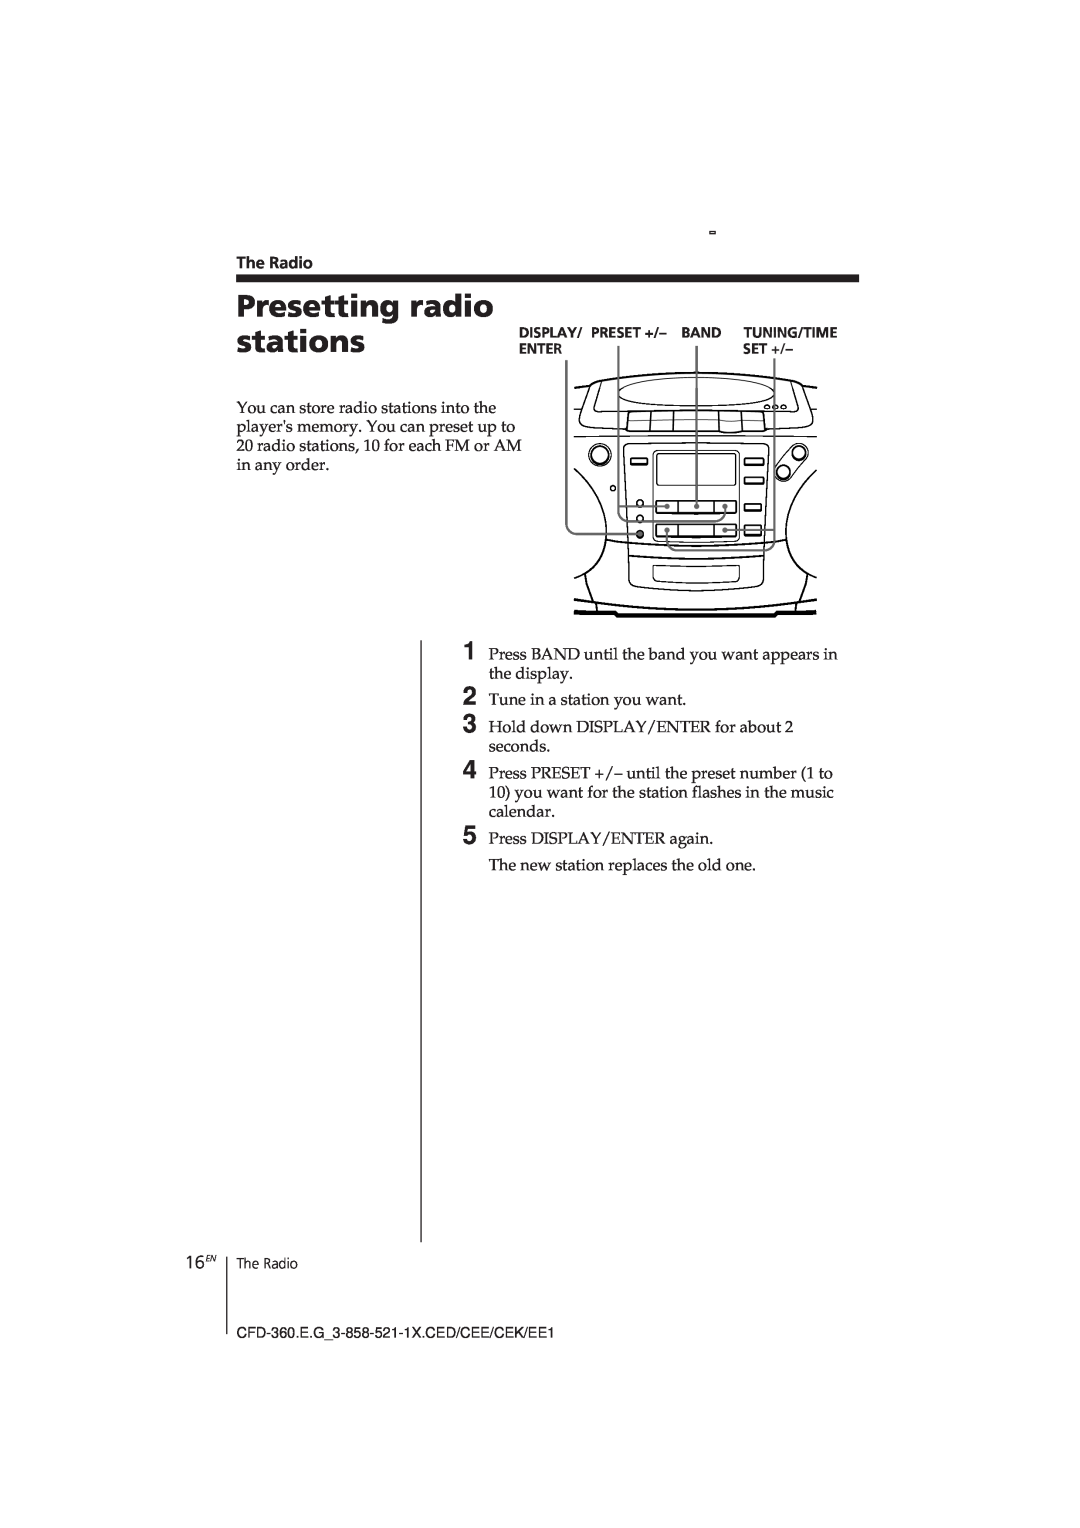 Sony CFD-360 operating instructions Presetting radio, stations, 16EN 